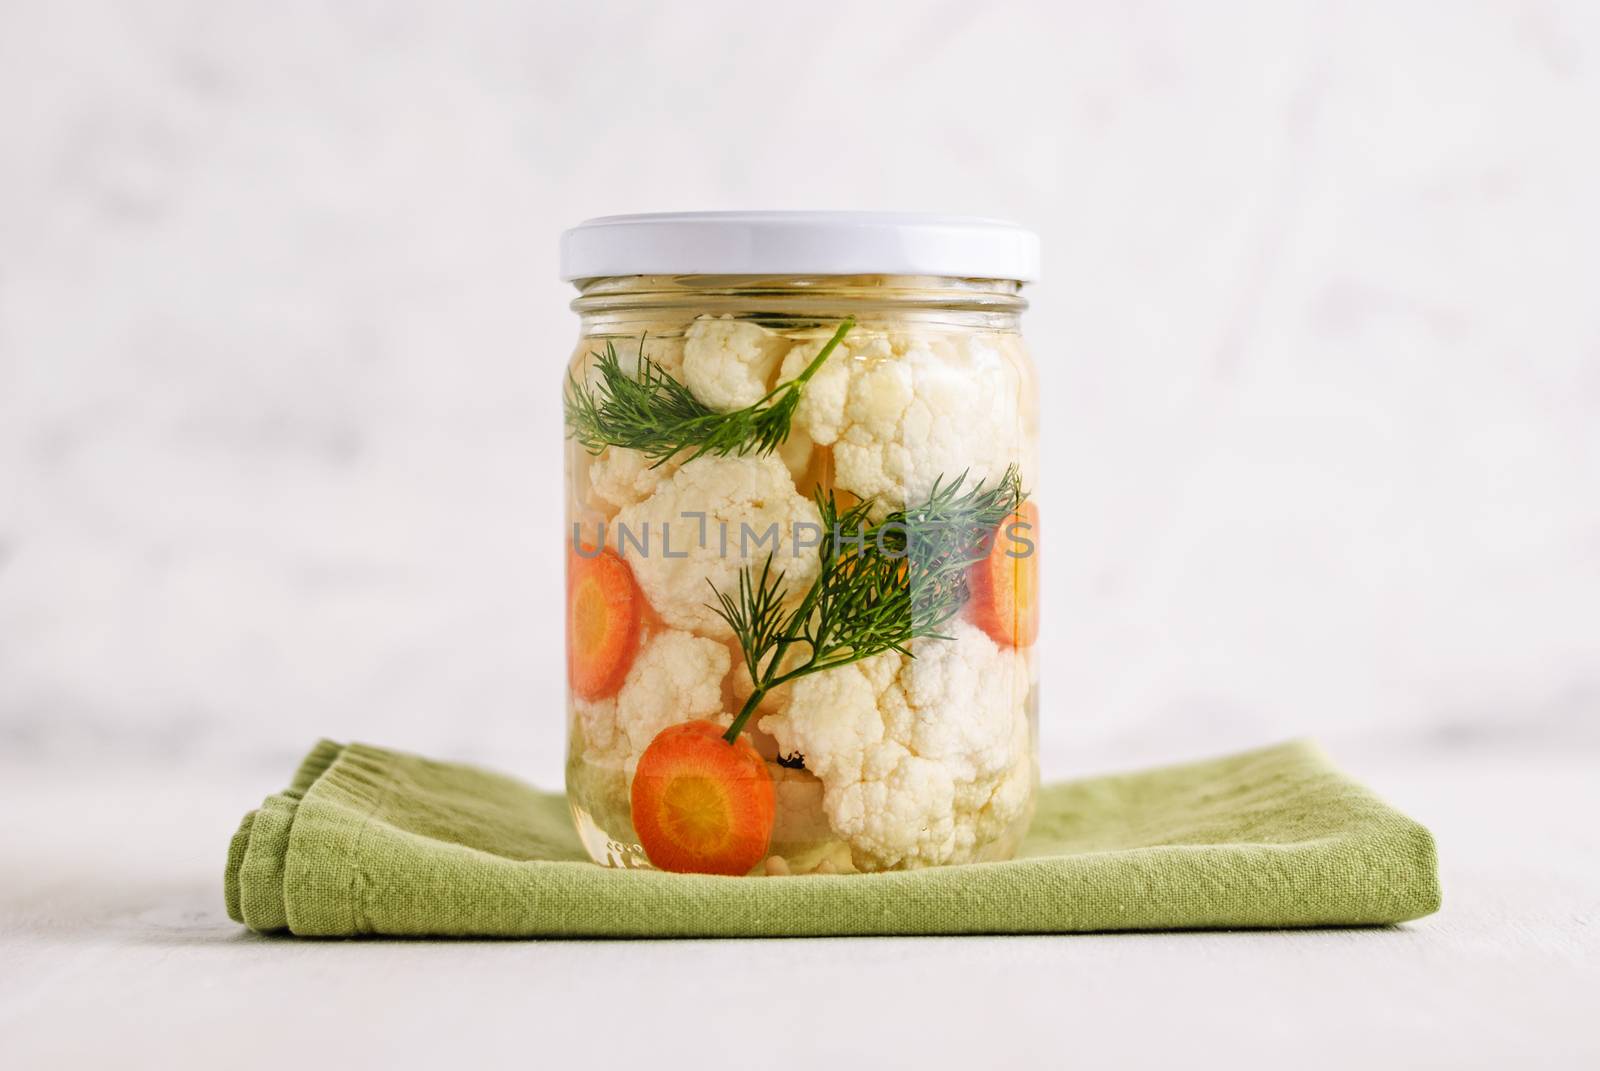 Sealed jar of fermented cauliflower with carrot and dill standing on napkin on white background